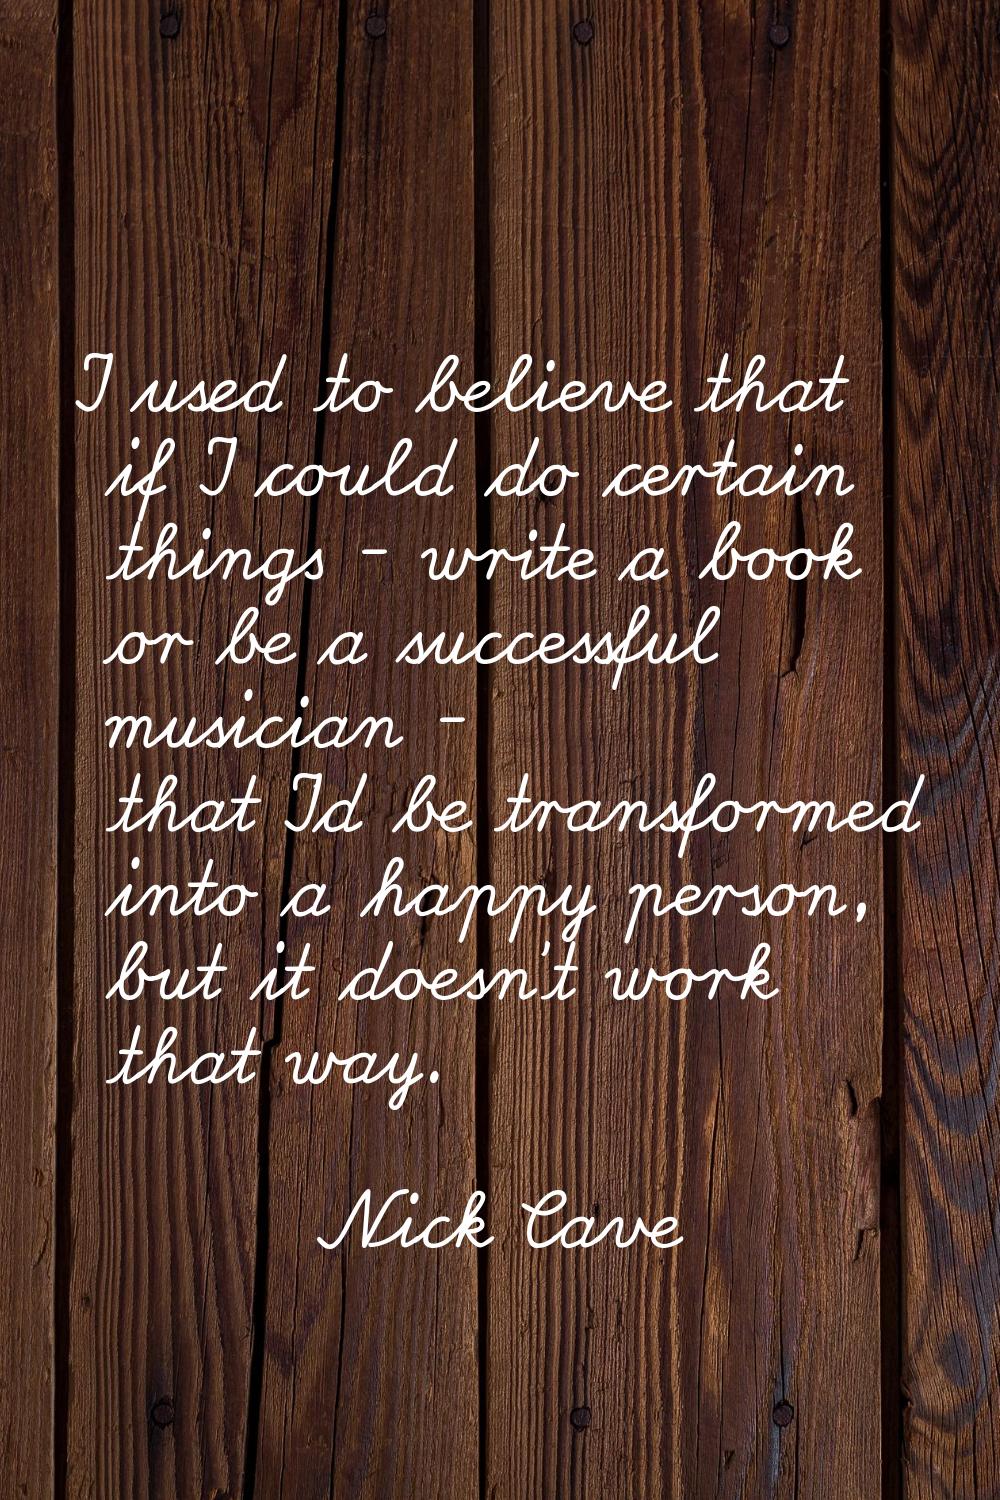 I used to believe that if I could do certain things - write a book or be a successful musician - th